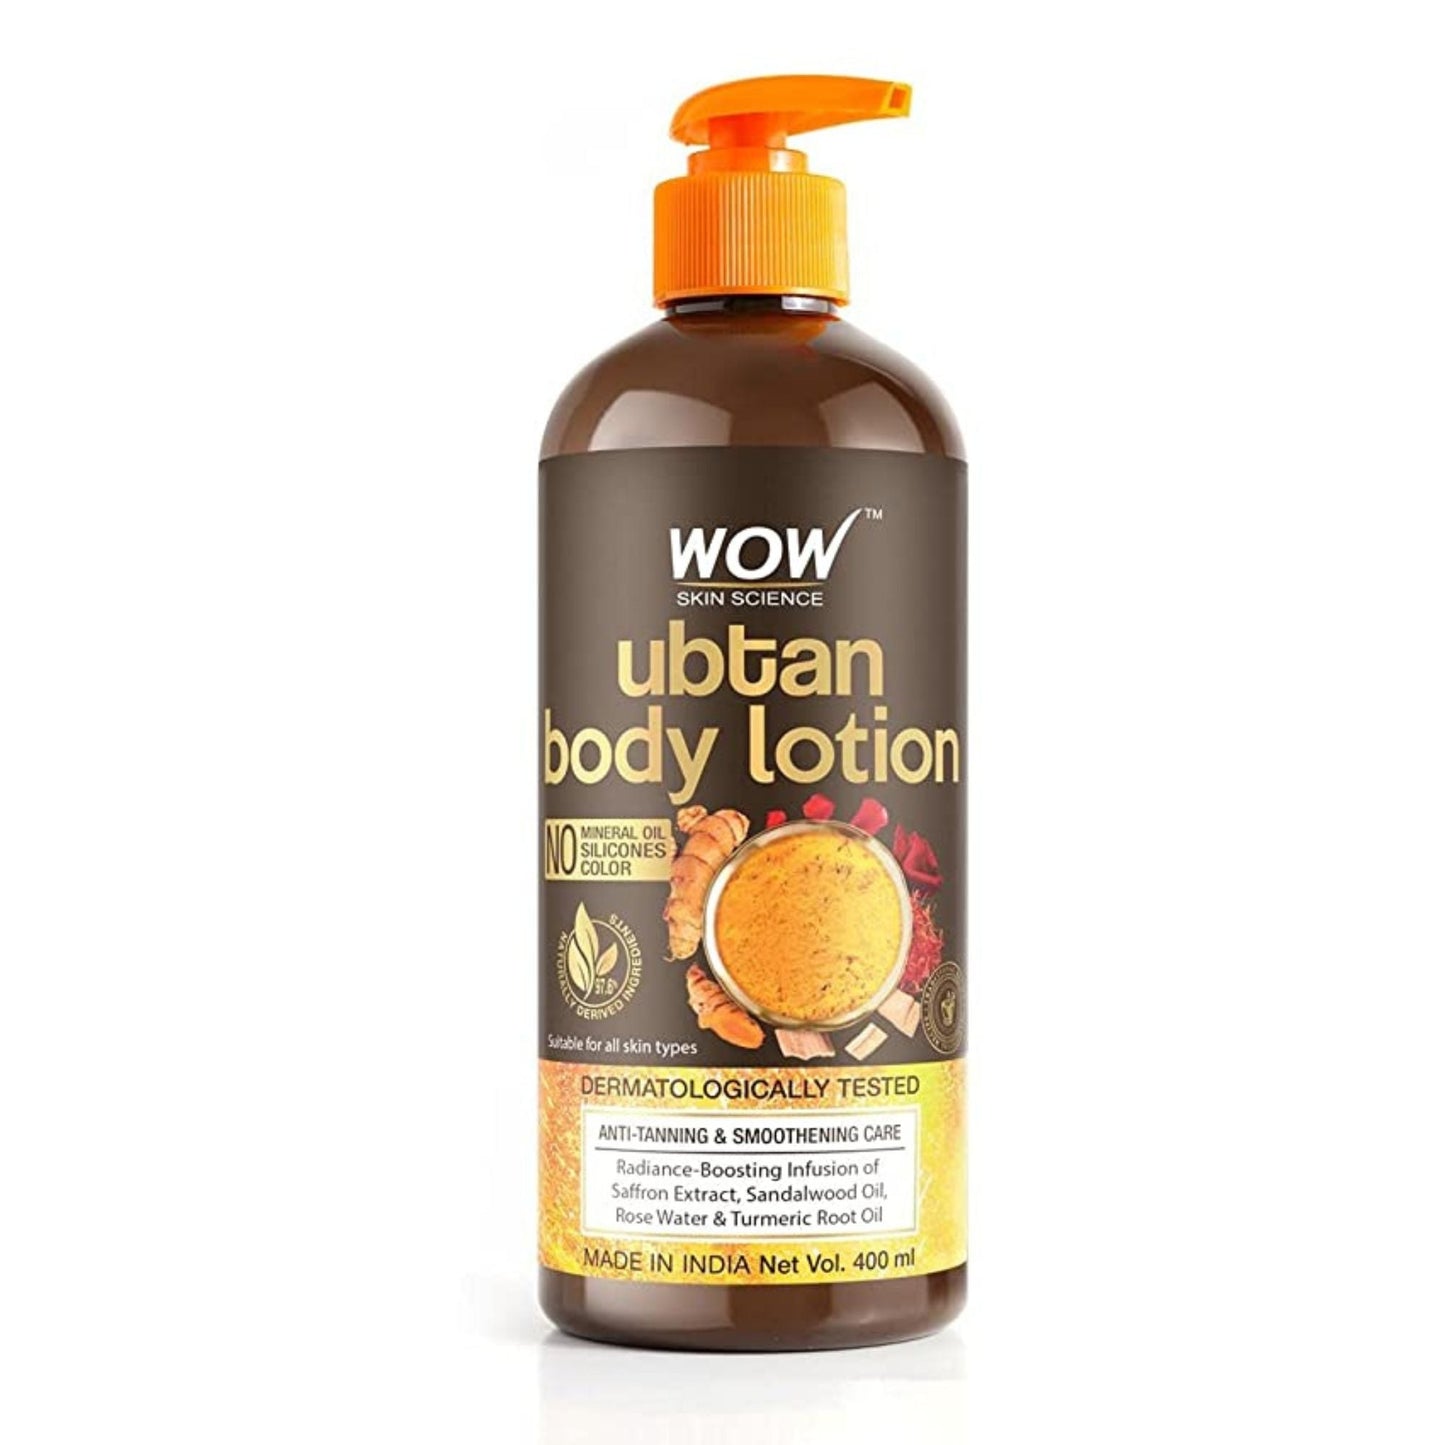 WOW Skin Science Ubtan Body Lotion- All skin type - Anti-Tanning & Smoothening Care with Saffron Extract, Sandalwood Oil - 400mL